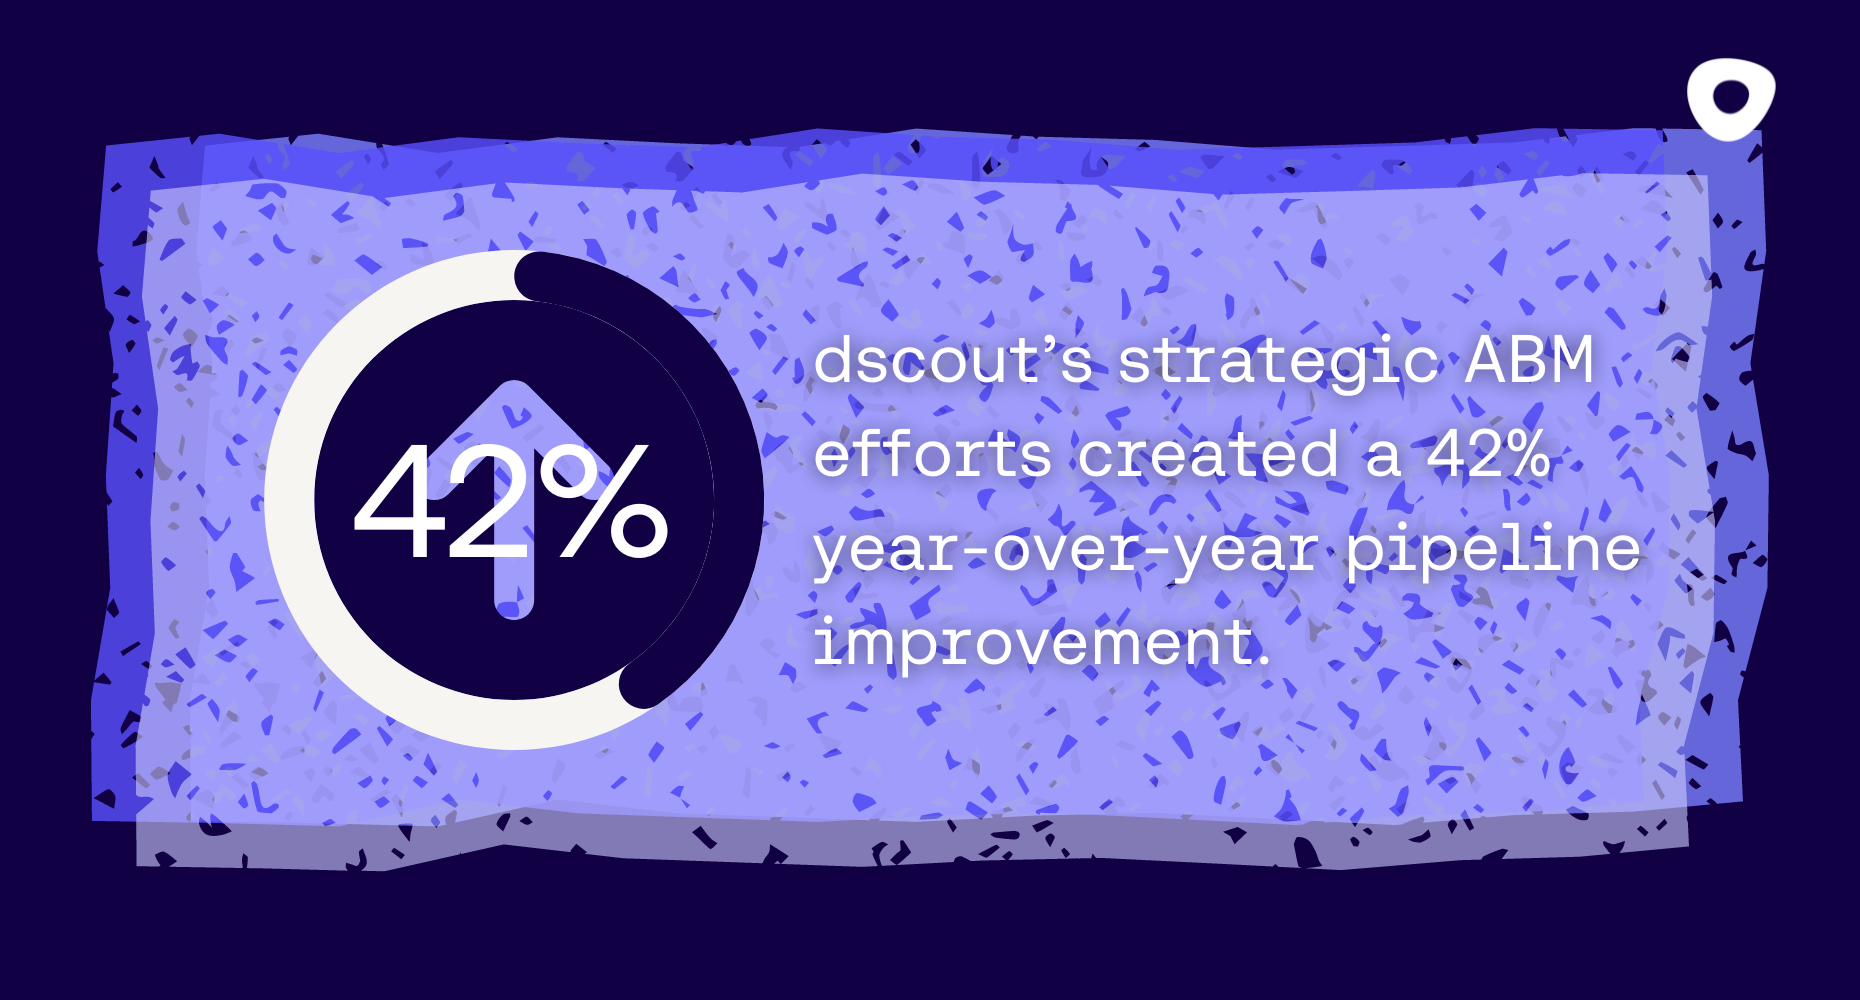 dscout’s strategic ABM efforts created a 42% year-over-year pipeline improvement.